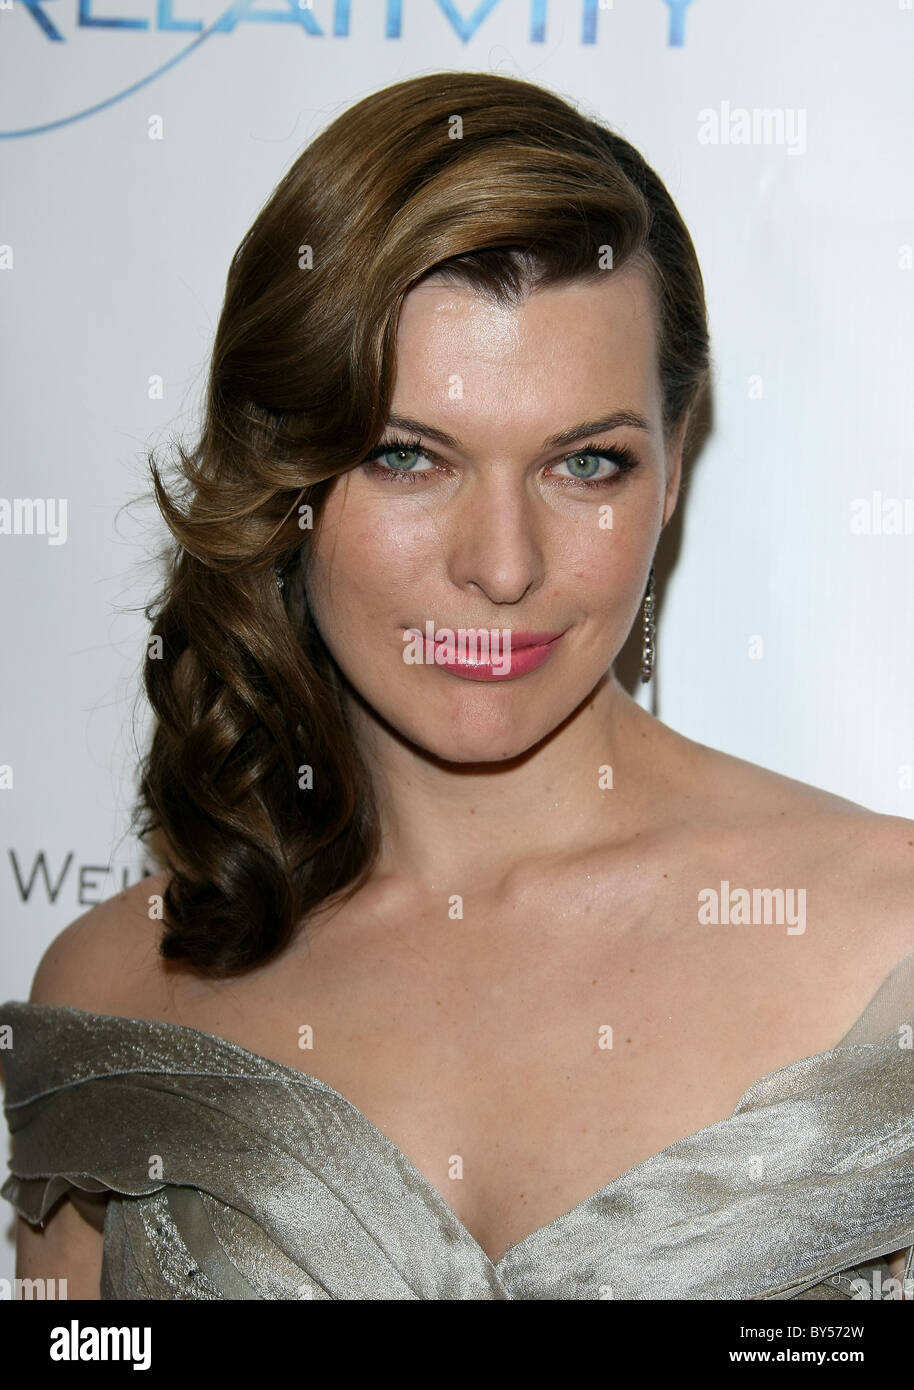 MILLA JOVOVICH RELATIVITY MEDIA AND THE WEINSTEIN COMPANY 2011 GOLDEN GLOBES AFTER PARTY BEVERLY HILLS LOS ANGELES CALIFORNIA Stock Photo